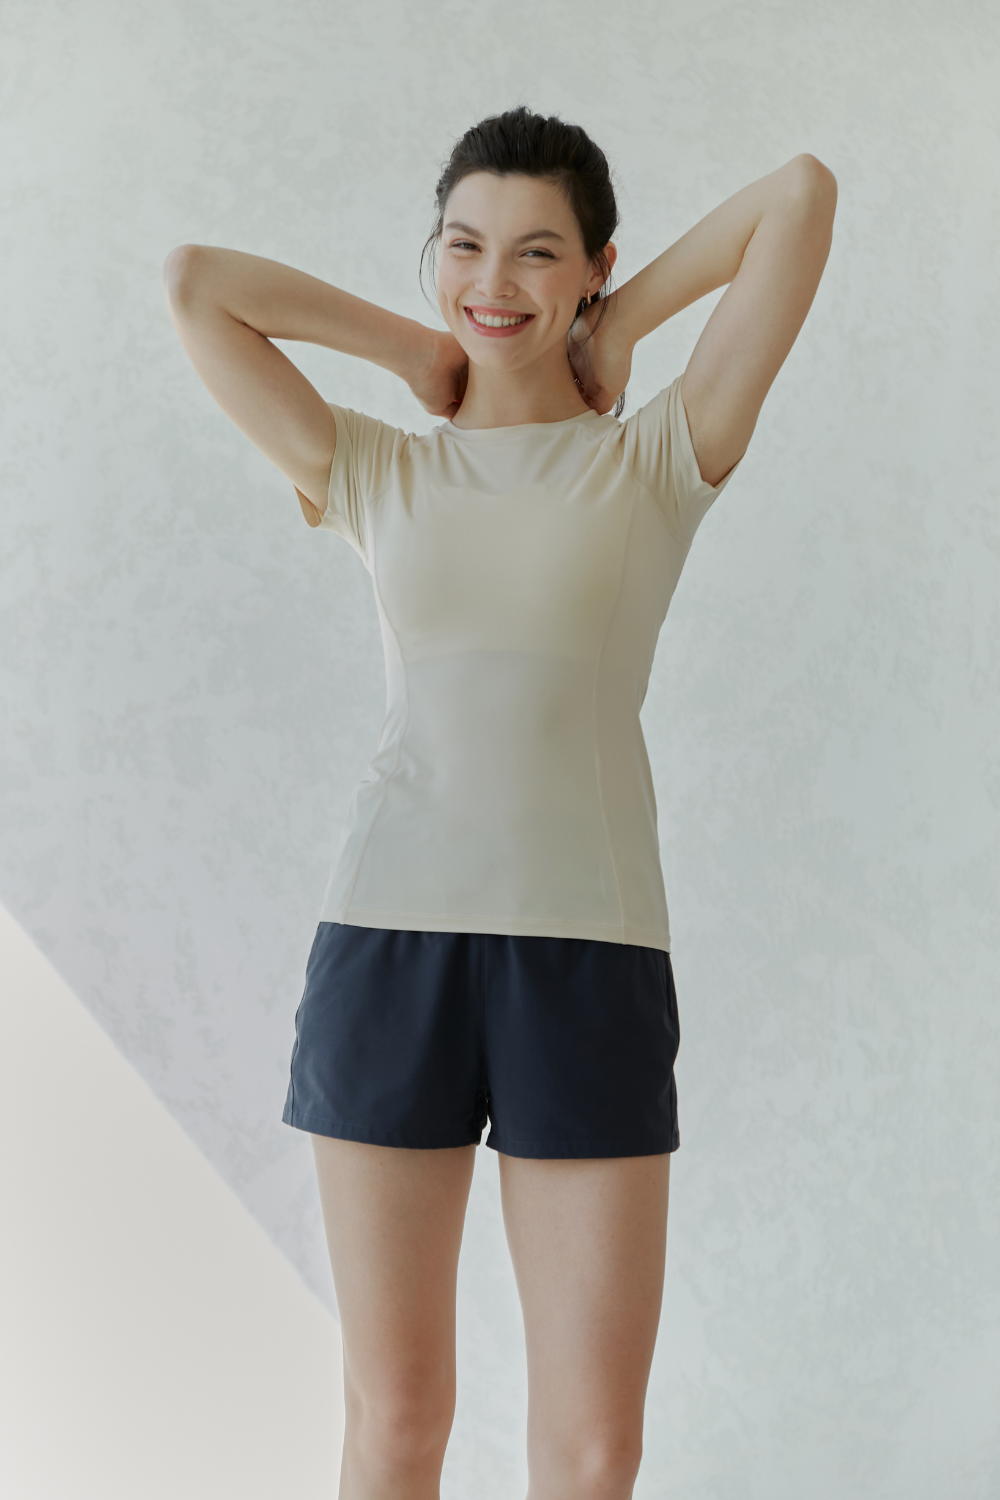 Airtouch Ice Pace Short Sleeve